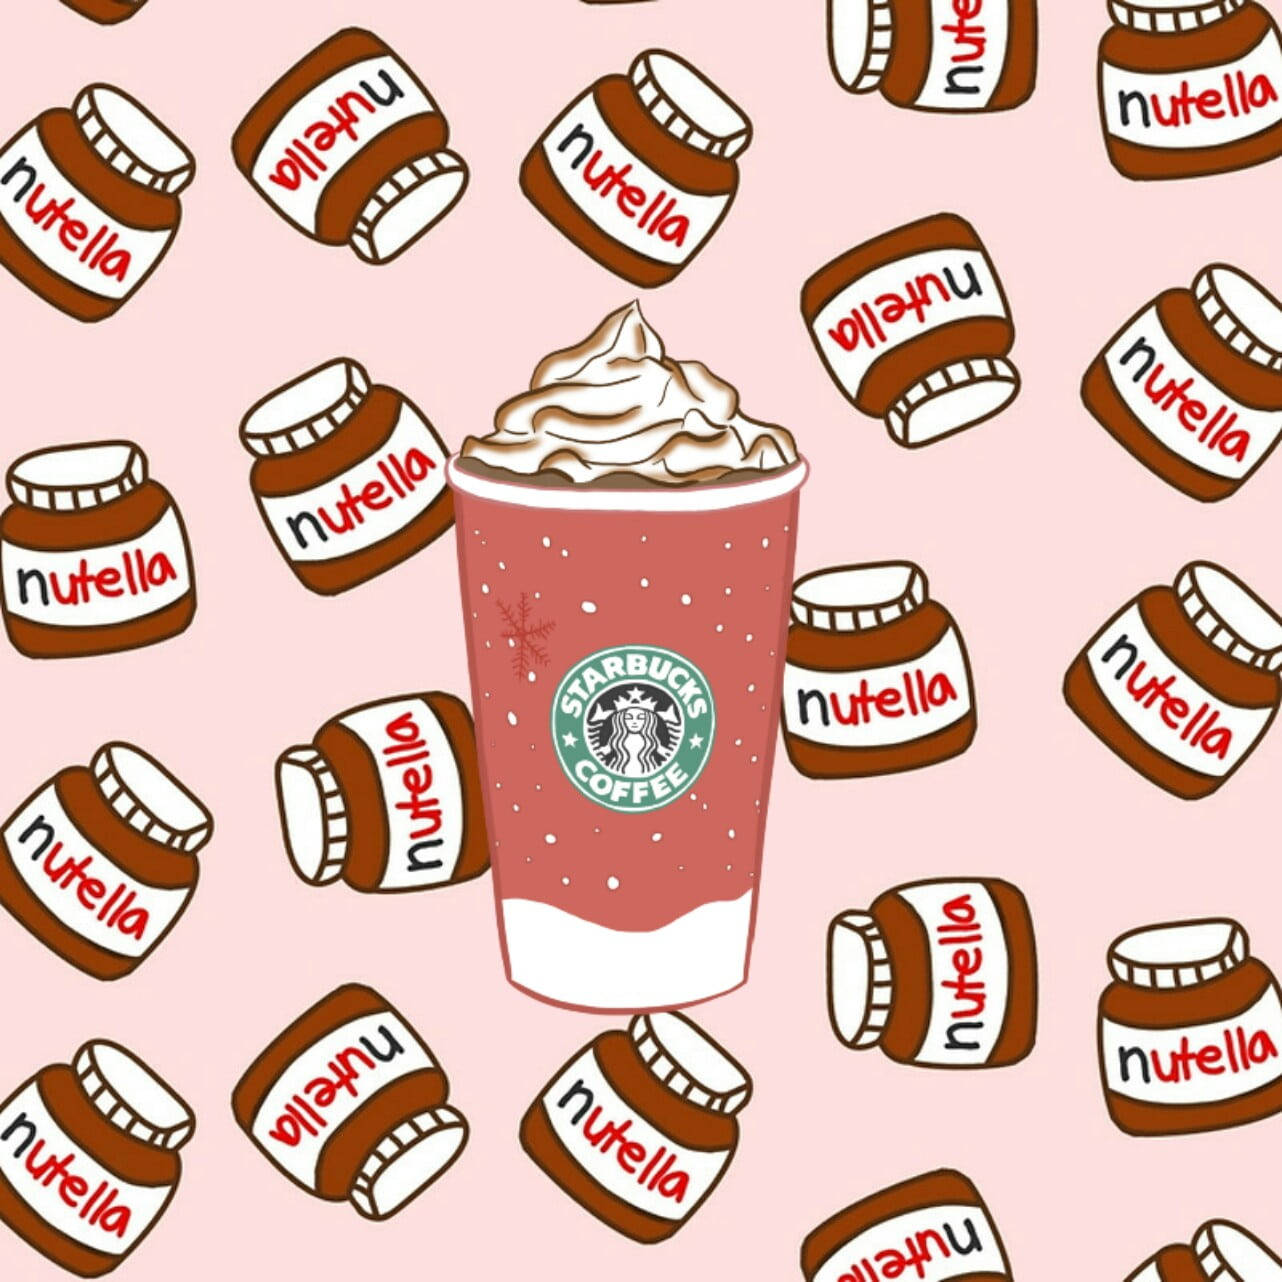 Cute Girly Starbucks Wallpapers Wallpapers